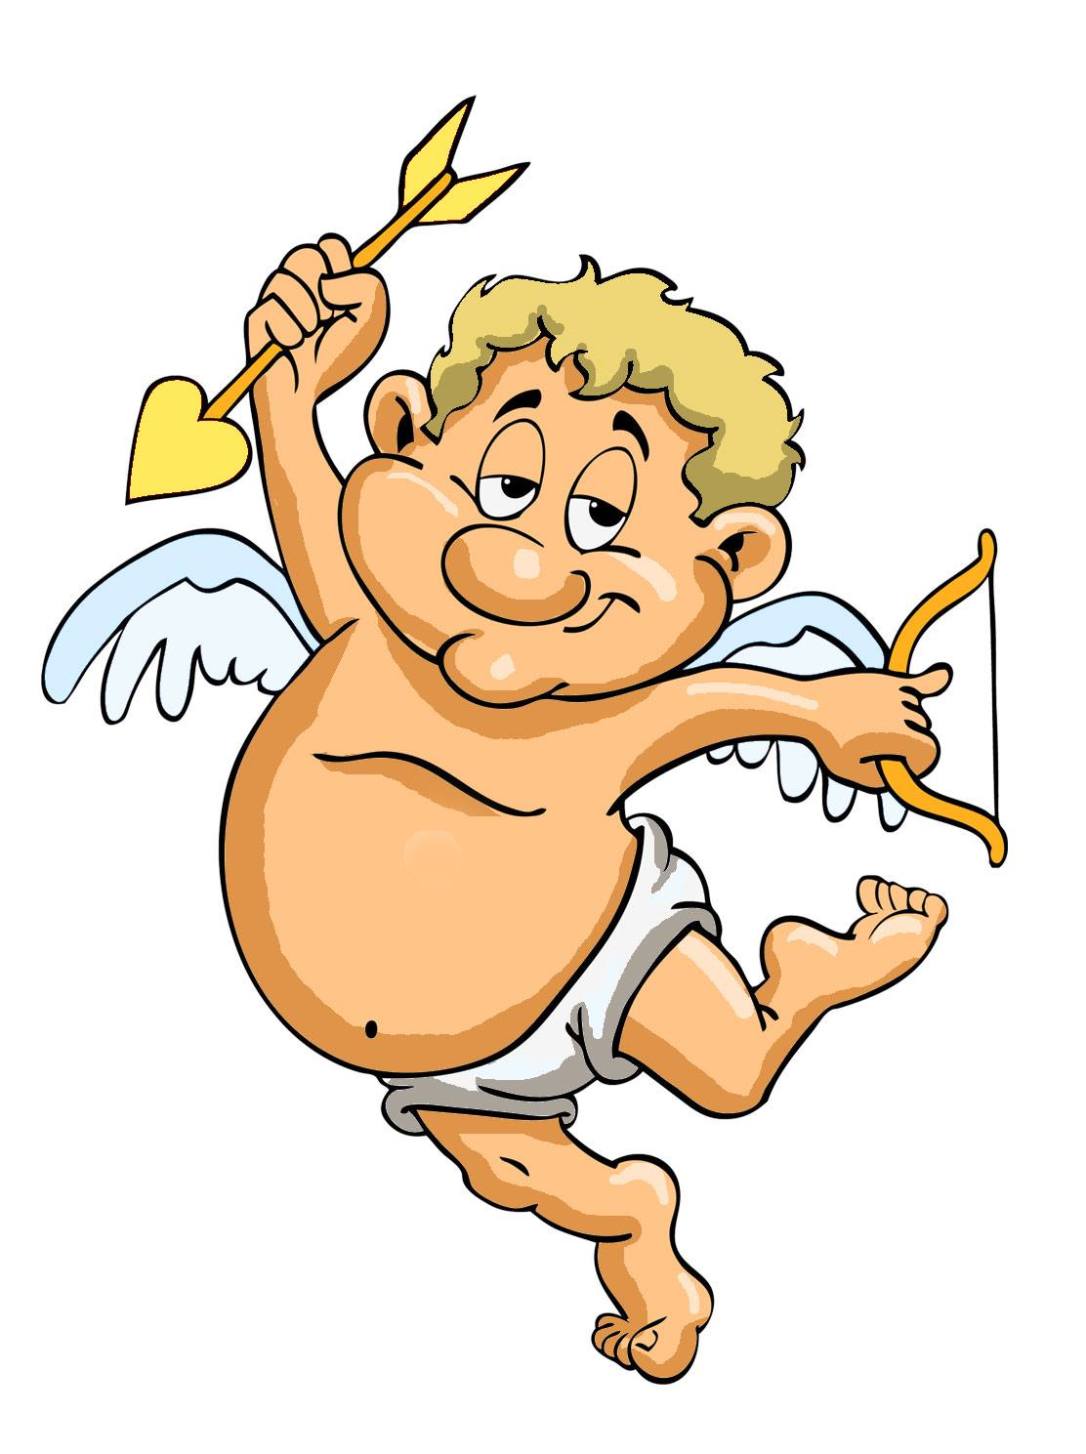 Cupid from 